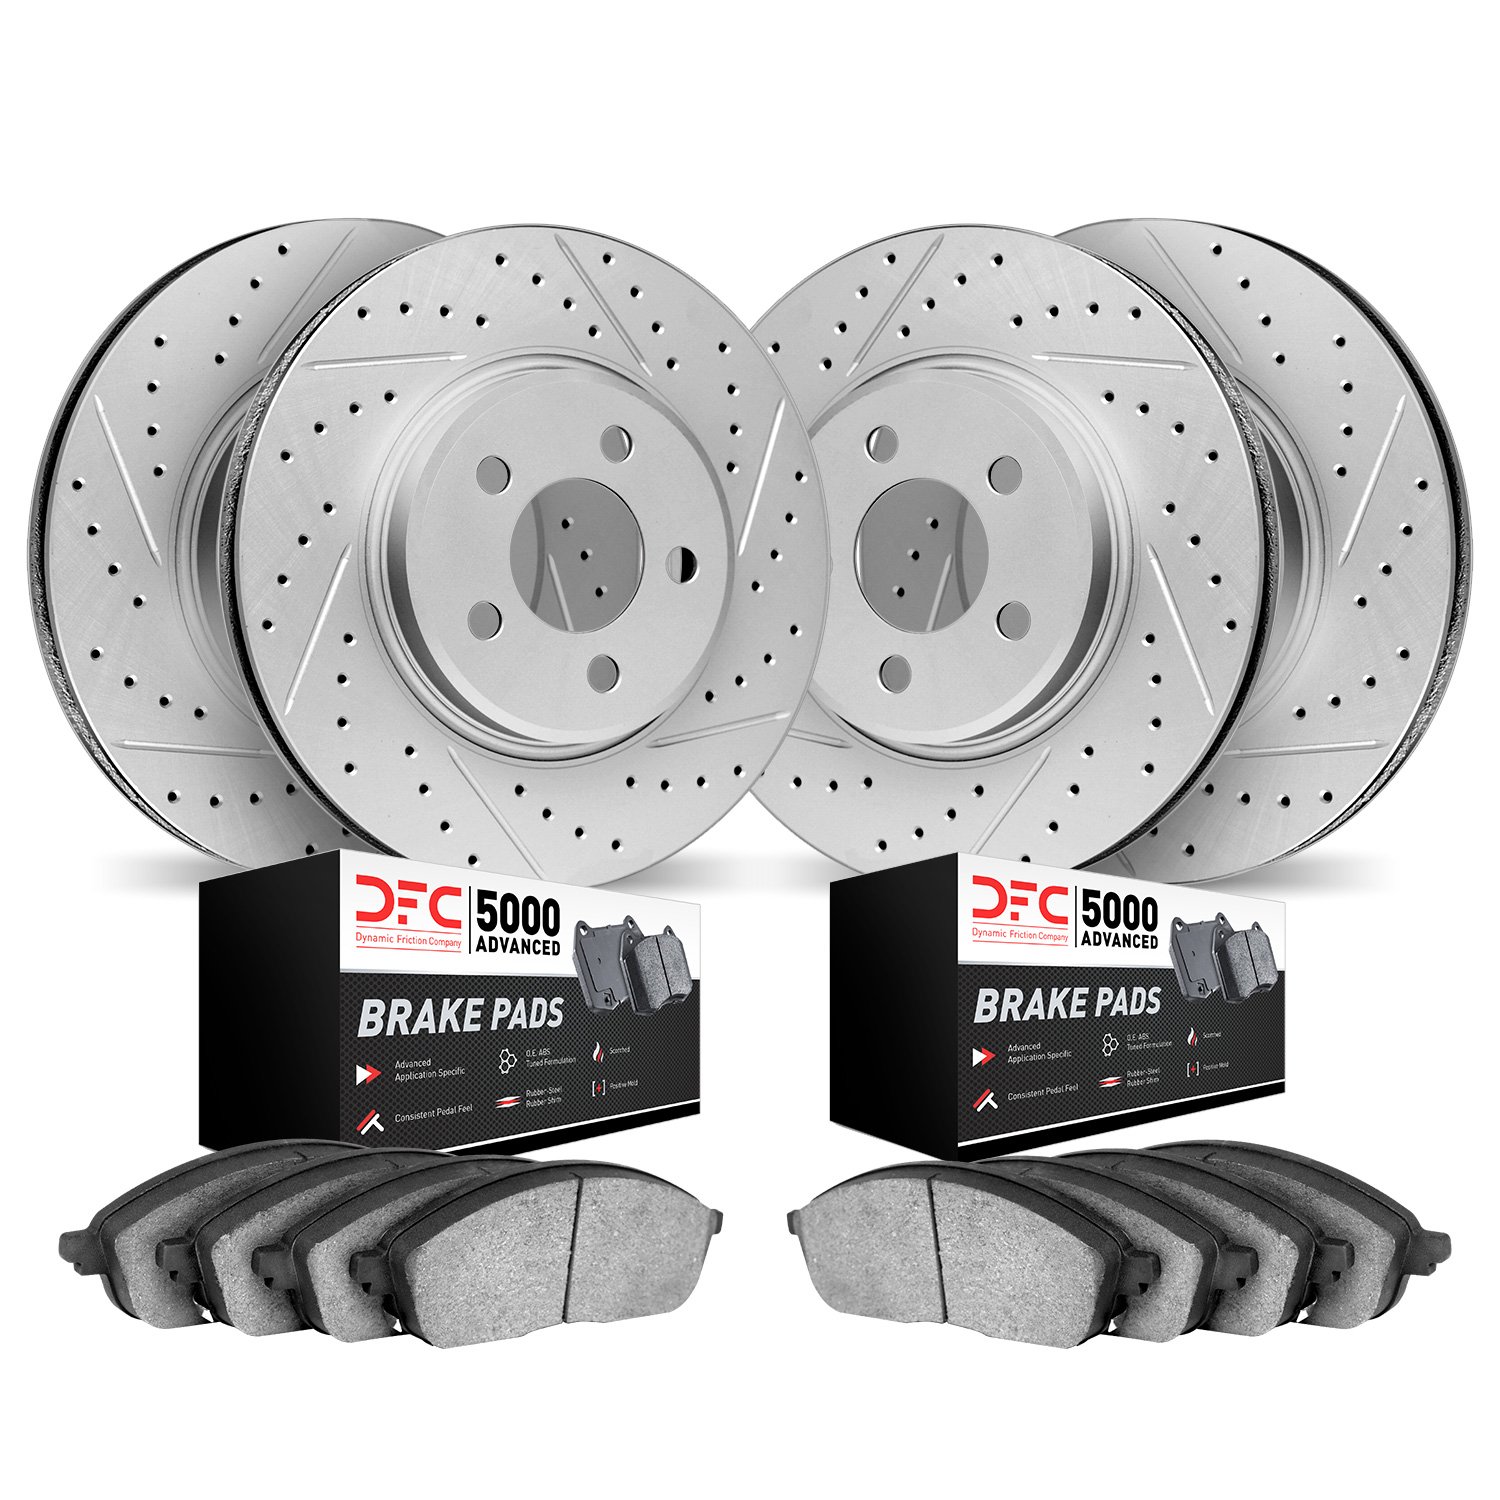 2504-31073 Geoperformance Drilled/Slotted Rotors w/5000 Advanced Brake Pads Kit, 2008-2014 BMW, Position: Front and Rear